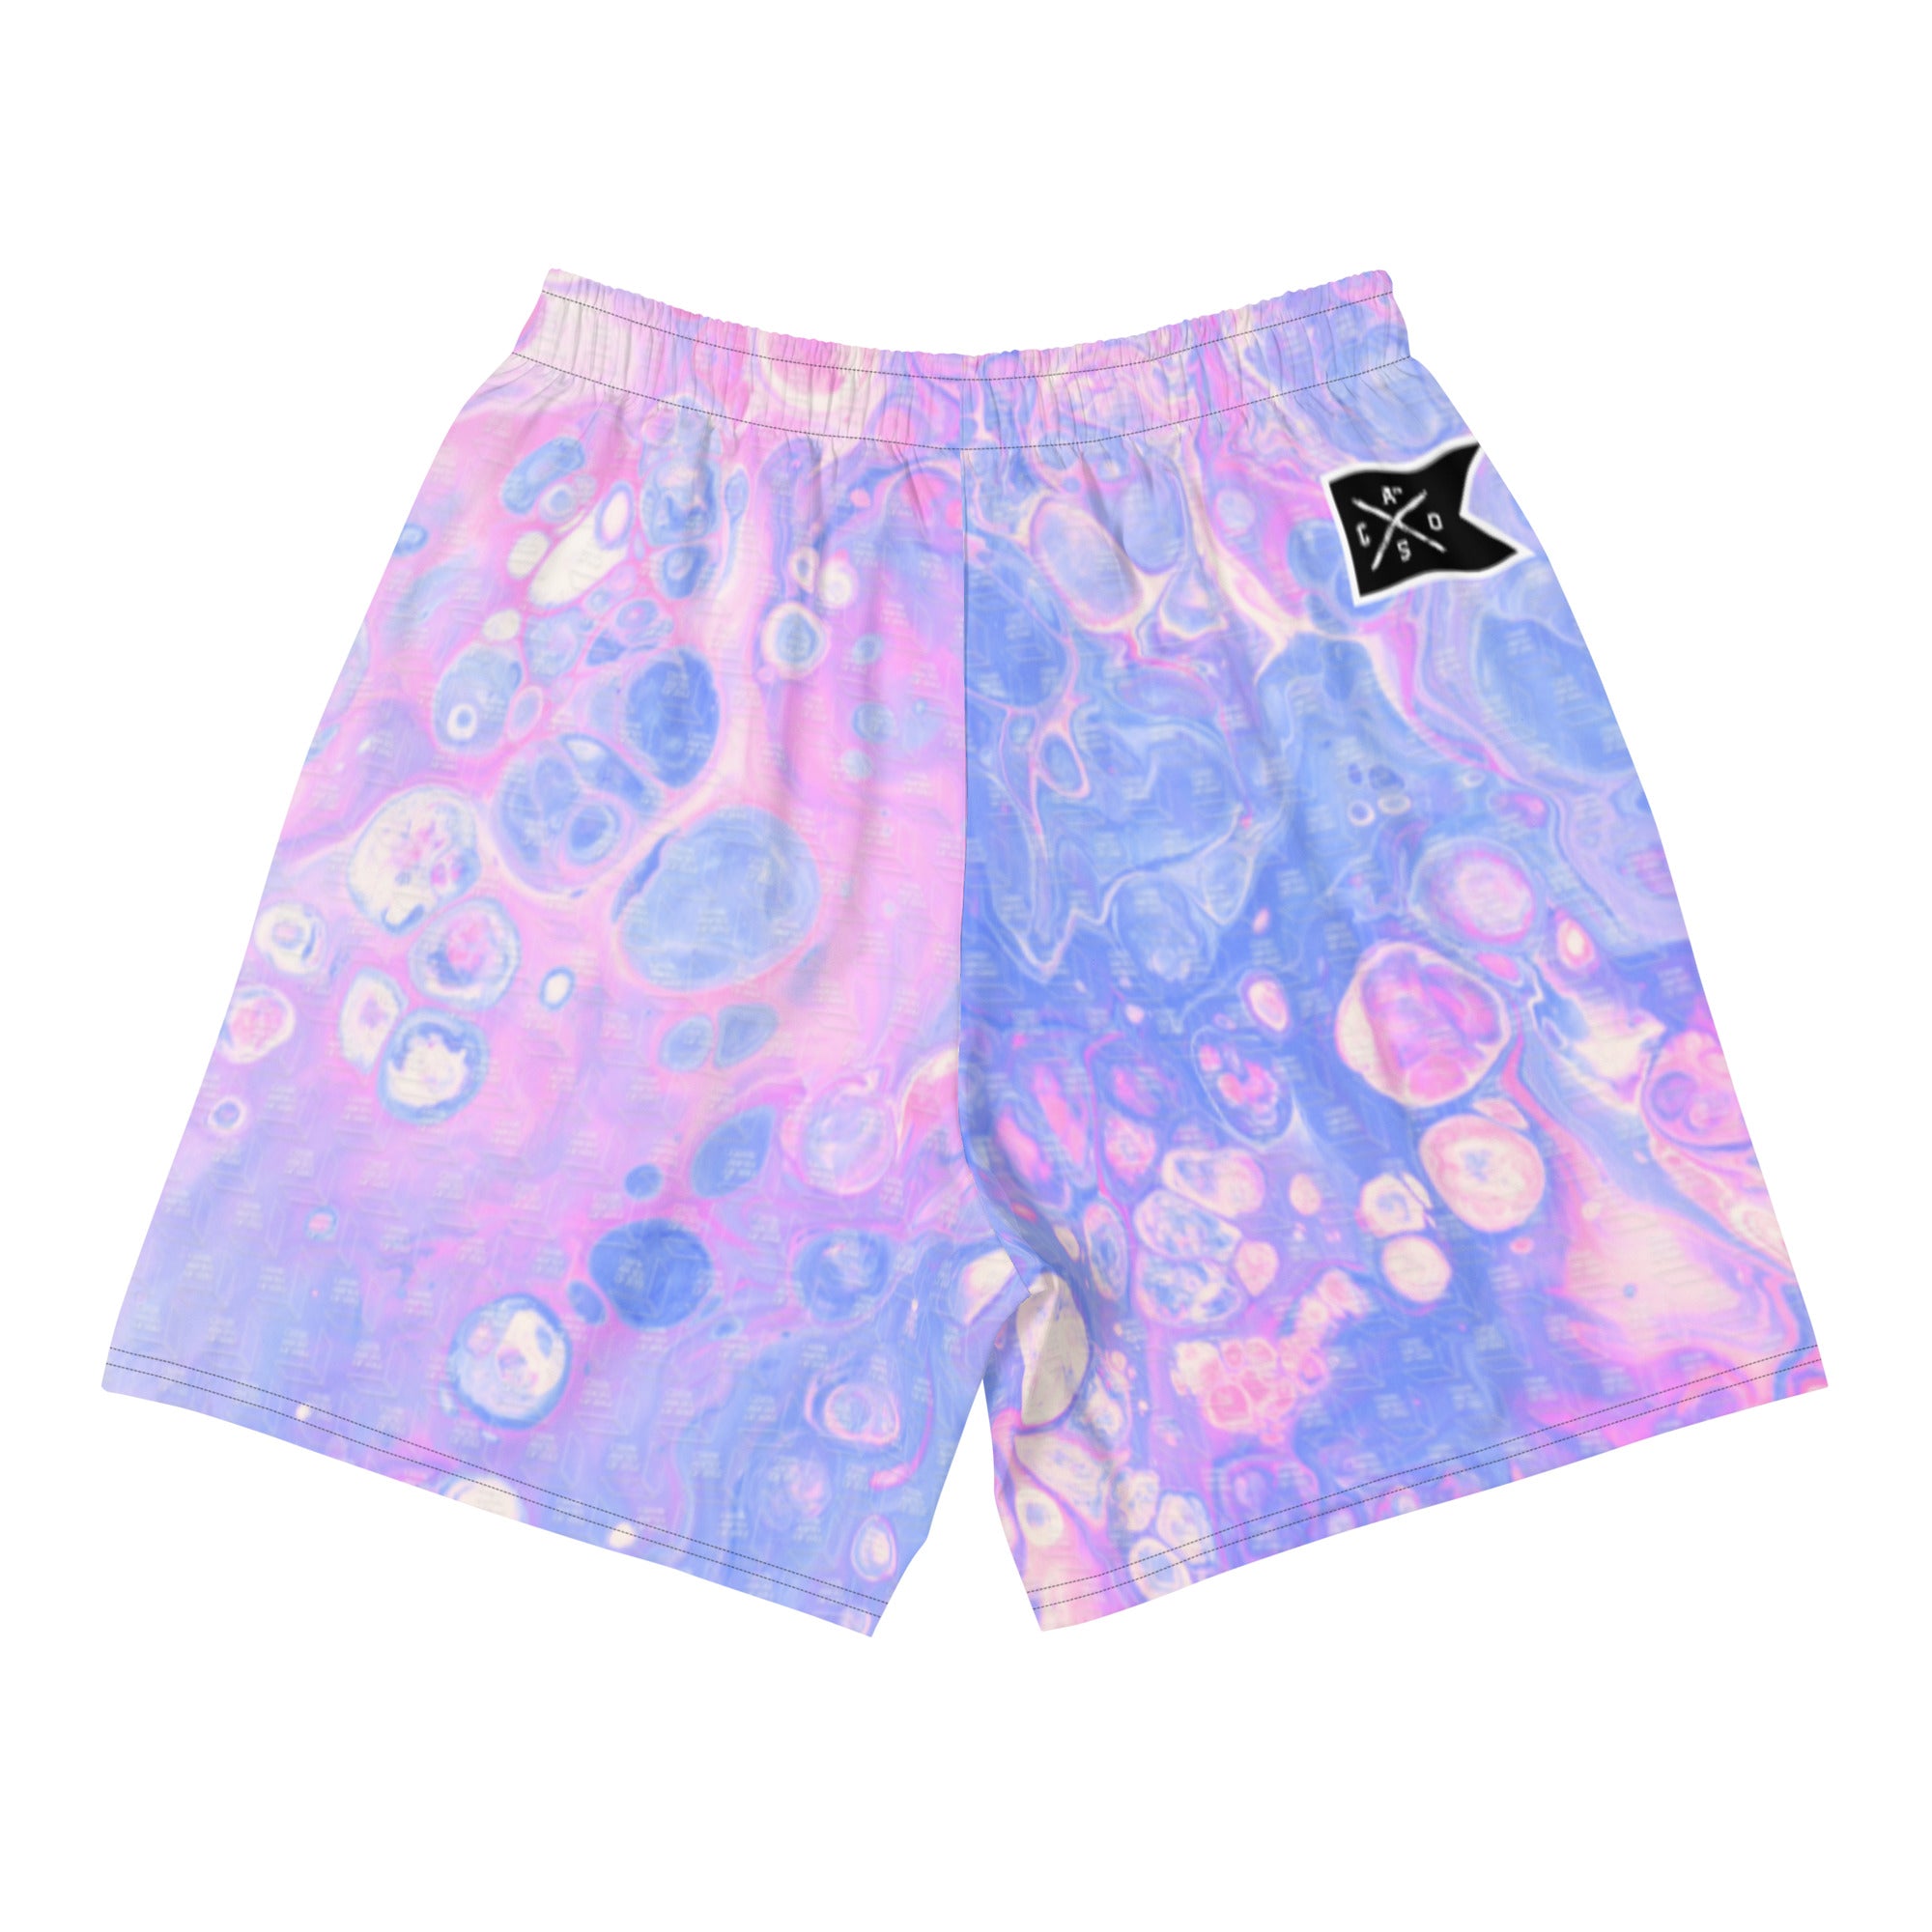 ☆ALWAYS OUT OF STOCK PIGMENT SHORTS XL☆-